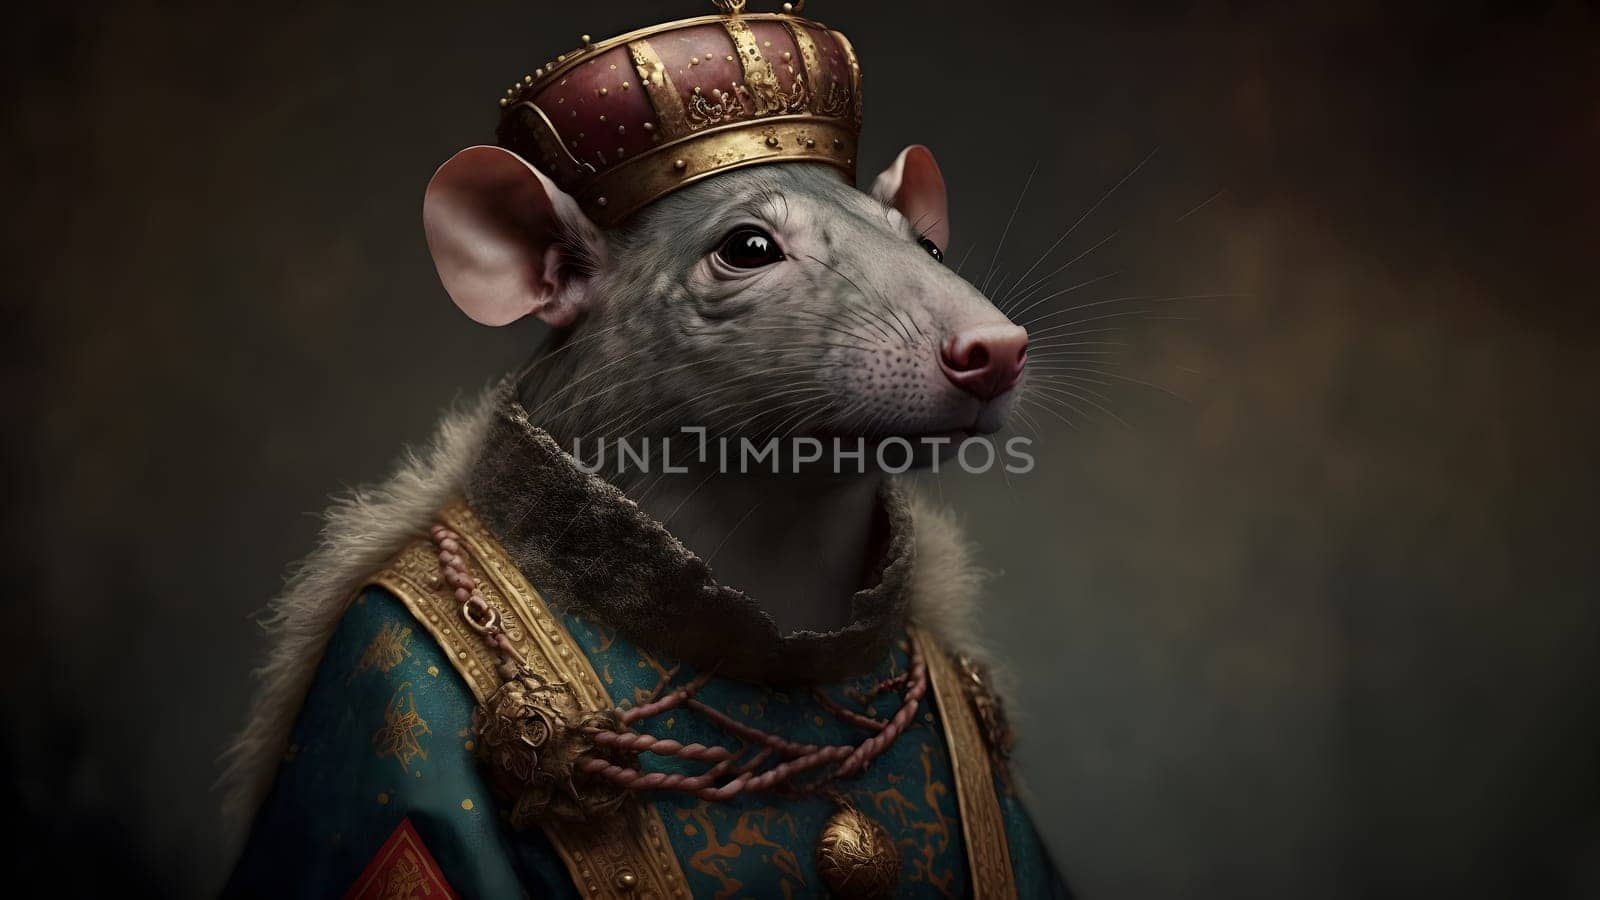 rat king medieval portrait, neural network generated art by z1b